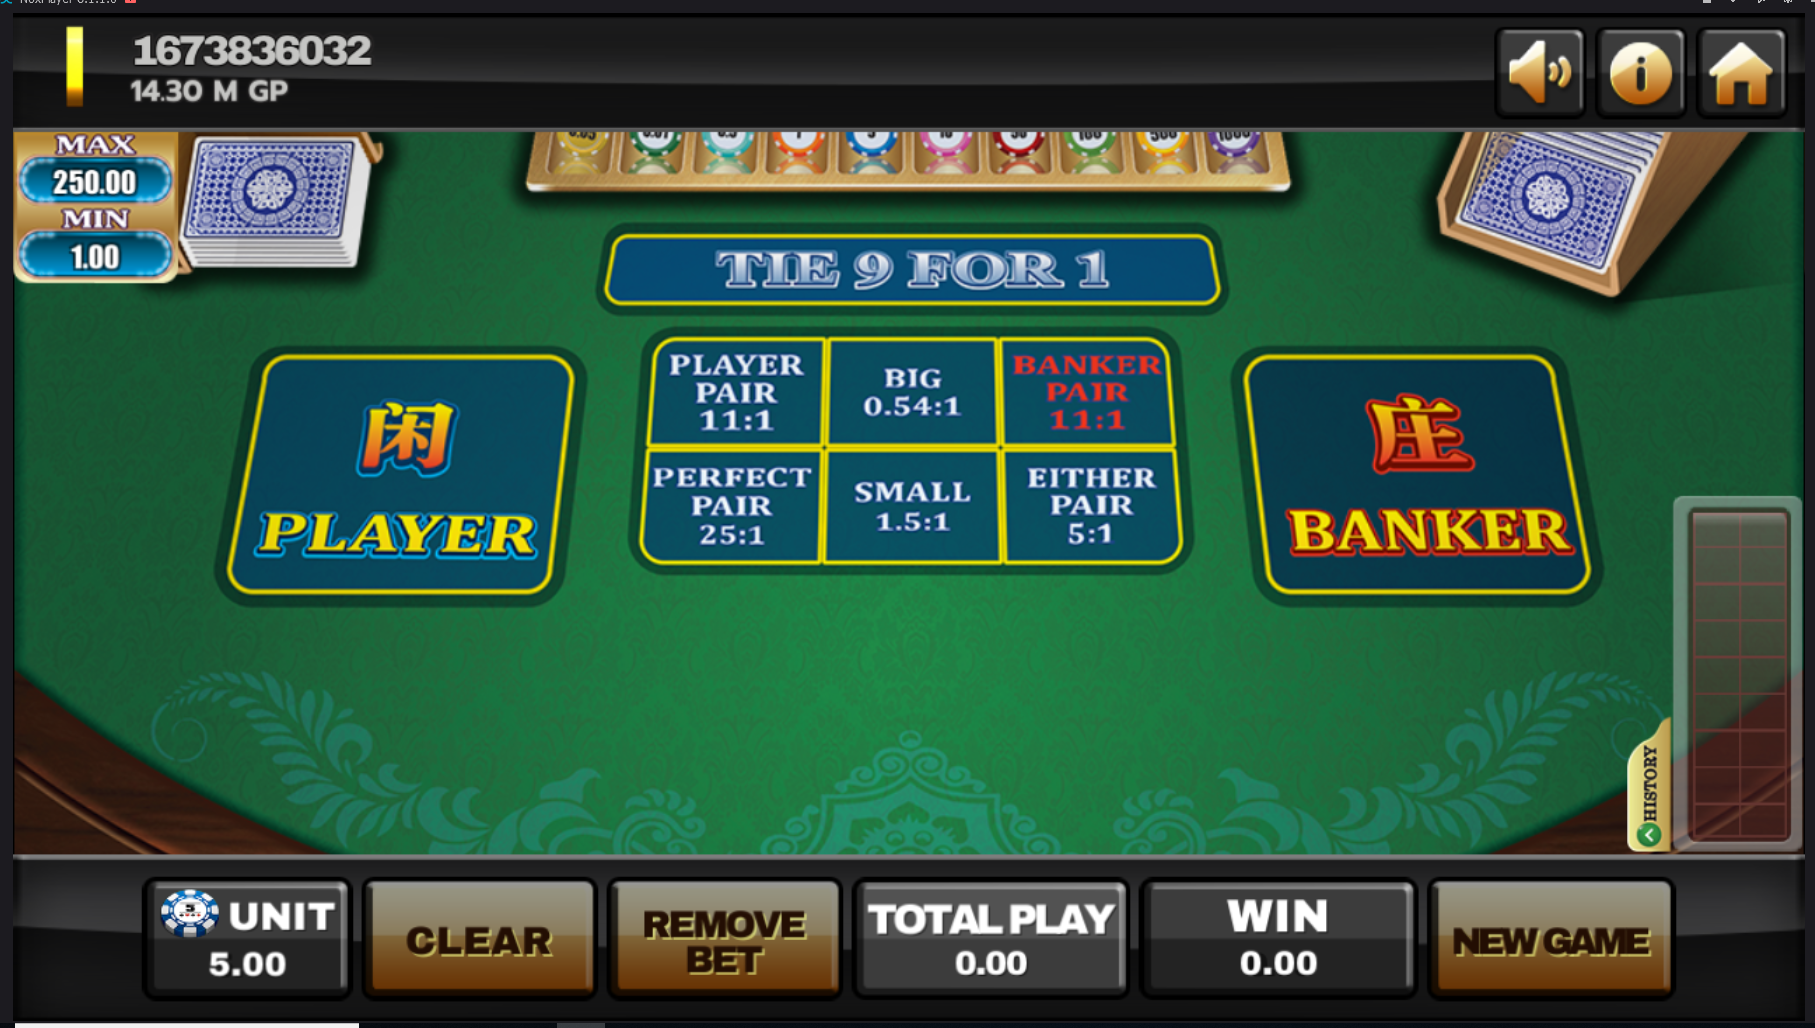 BACCARAT_2.png - 2.35 MB